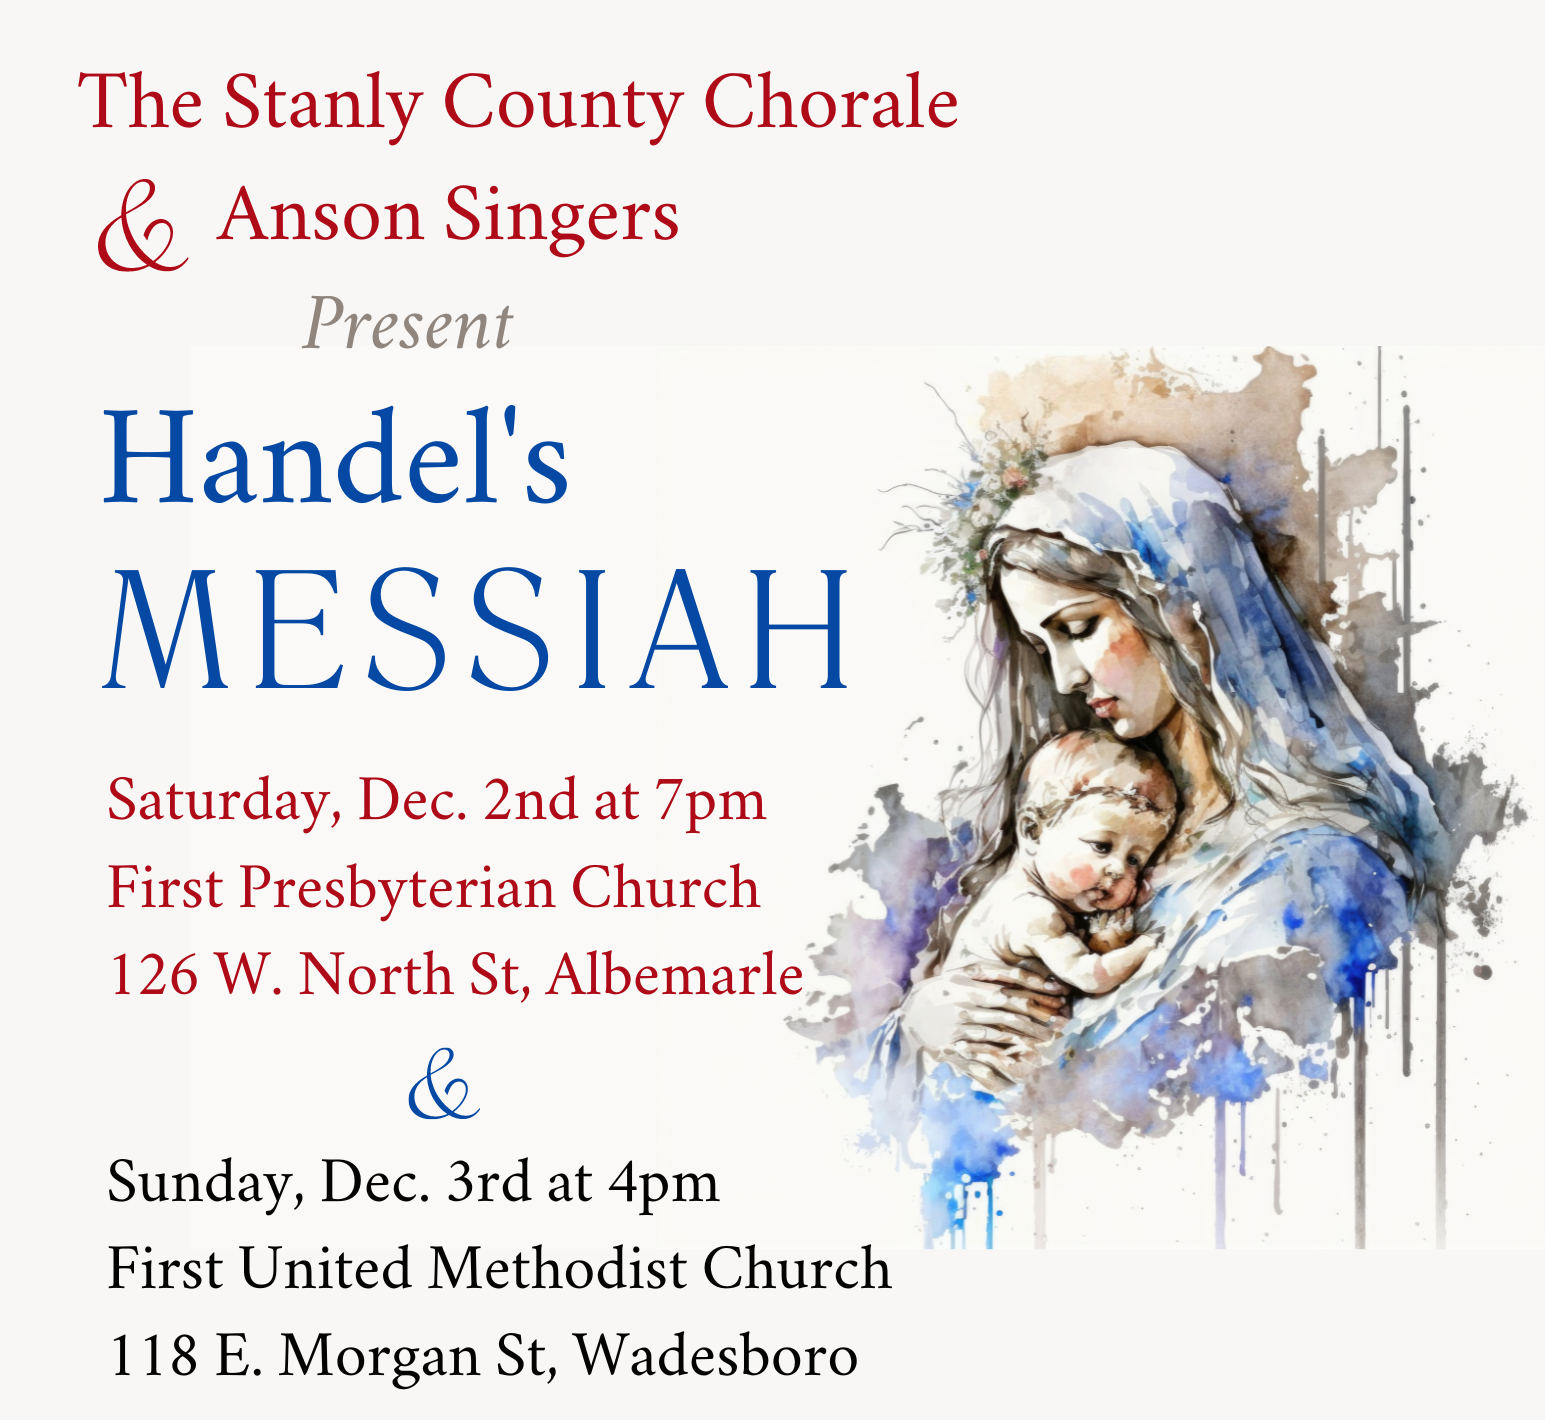 Stanly County Chorale, with the Anson Singers, present Handel’s “Messiah”